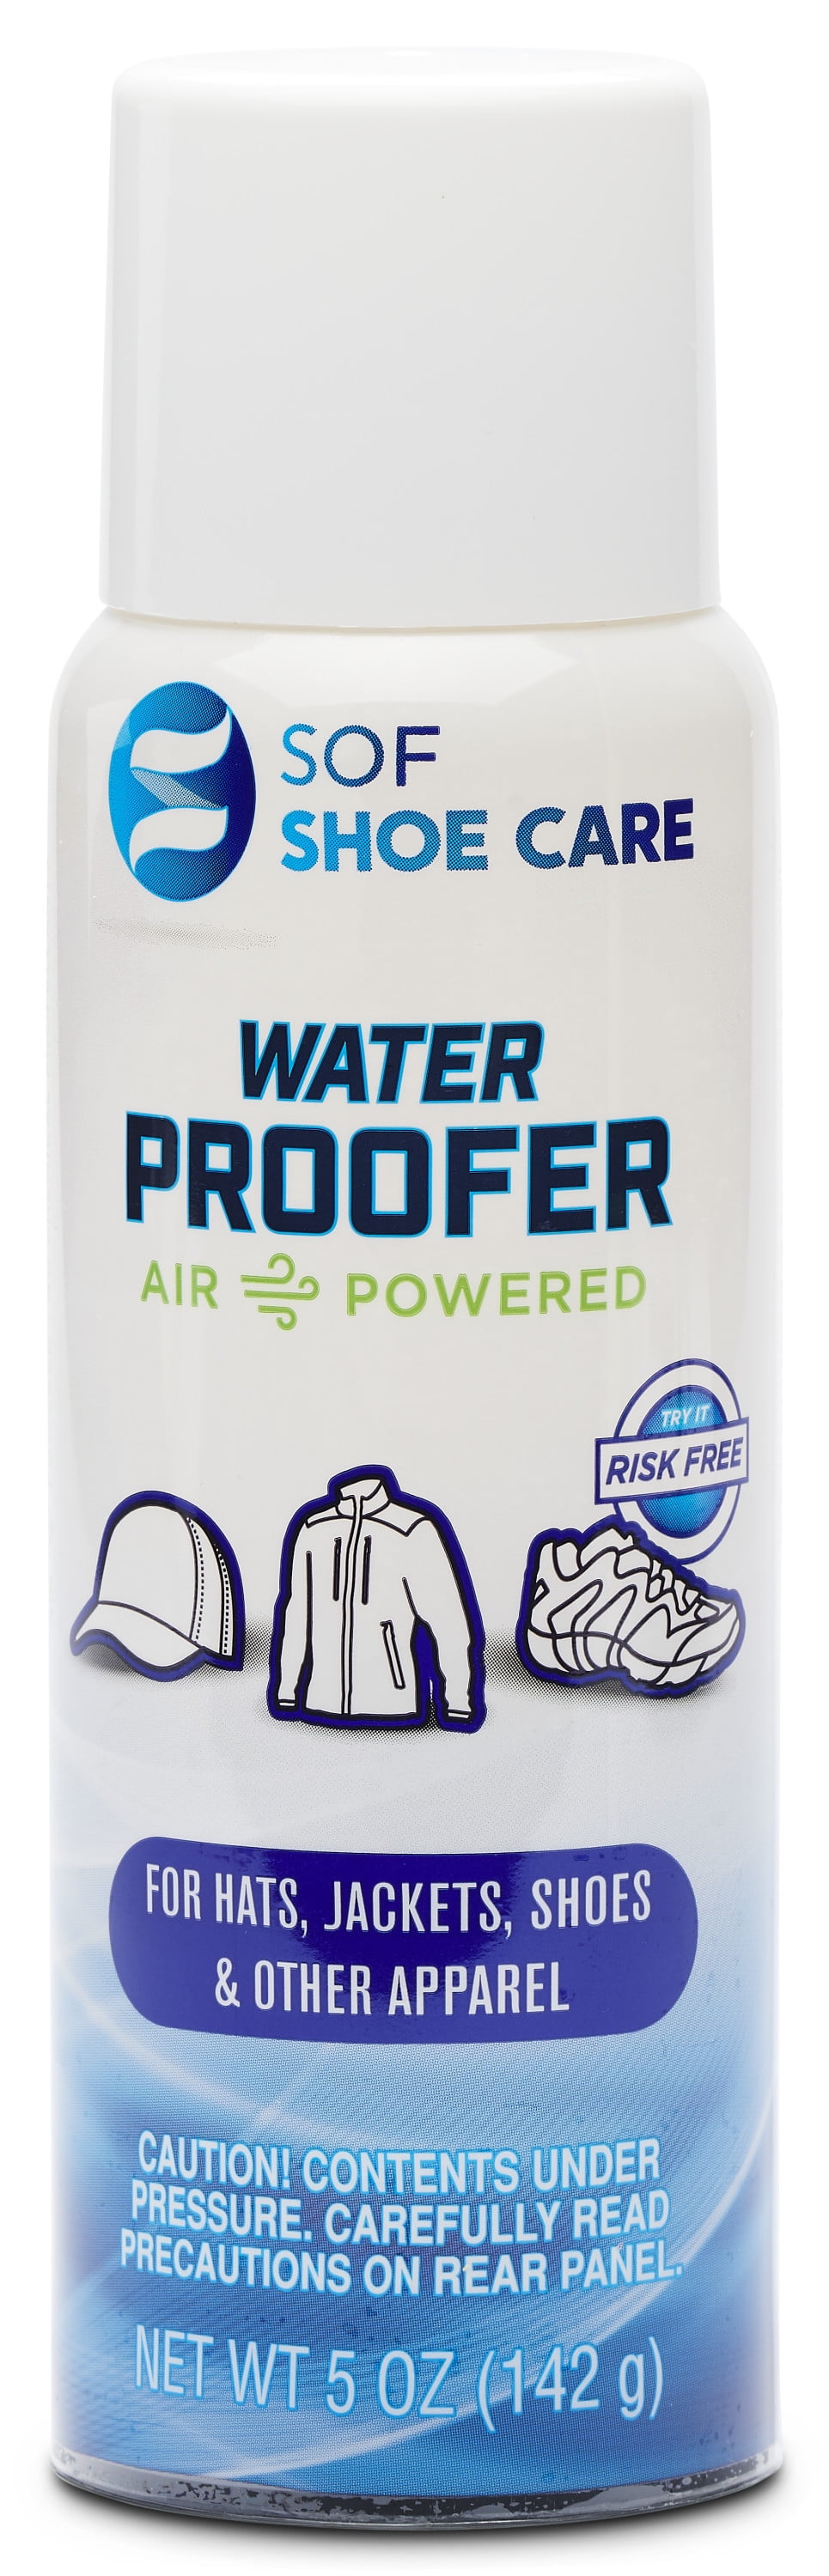 sof shoe care waterproofer air powered